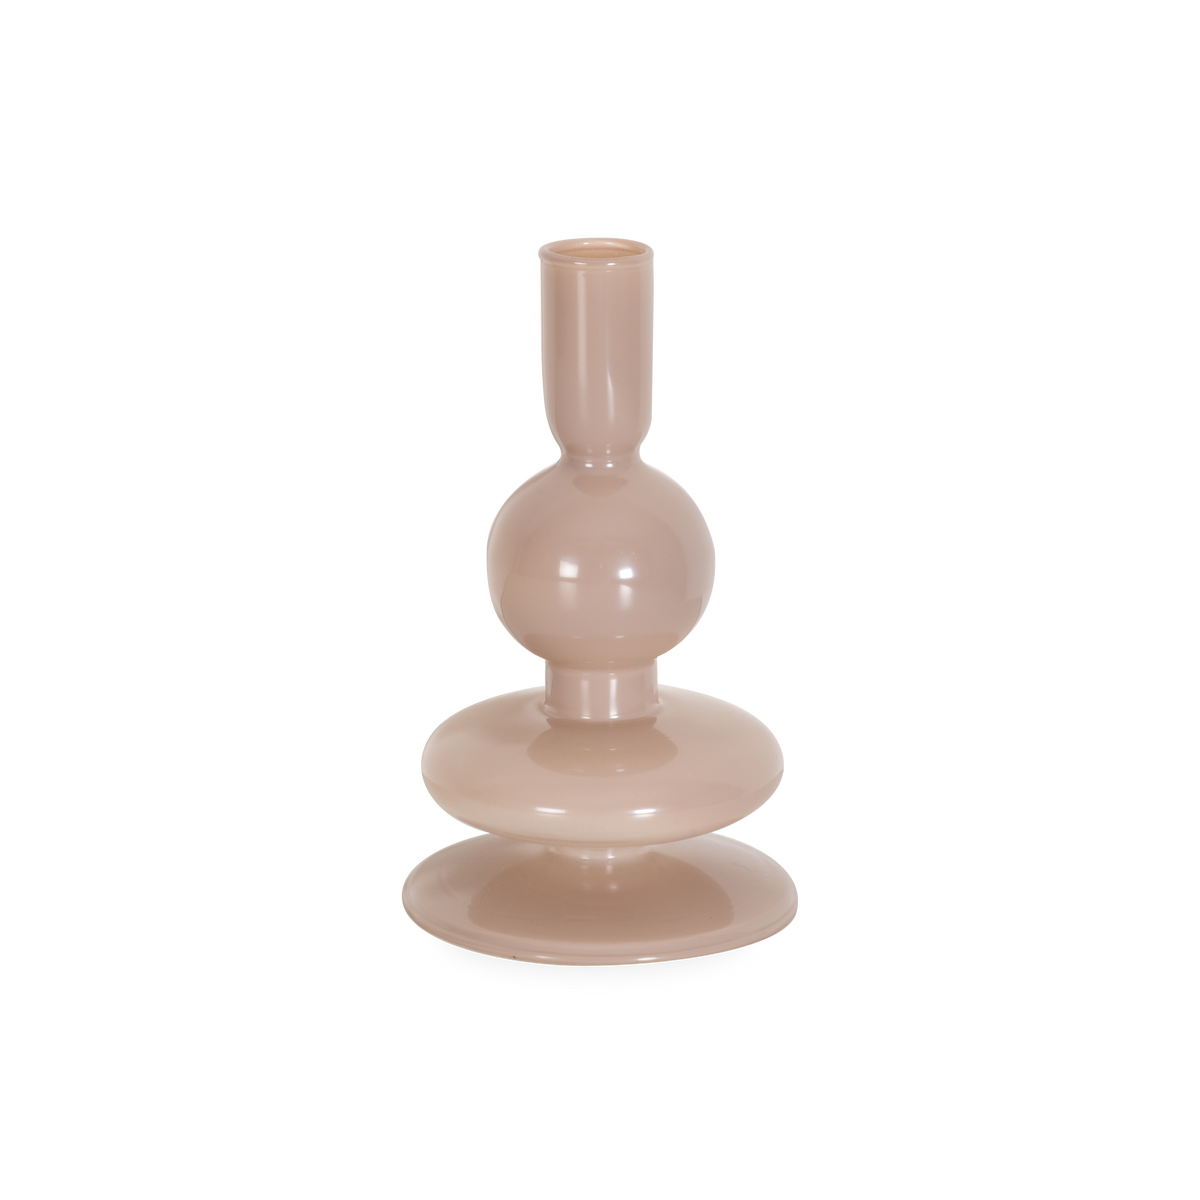 Influenced by minimalist Scandinavian designs,  the Bubble Glass Candle Holder adds a sense of sophistication through its amicable curves and sectioned design.